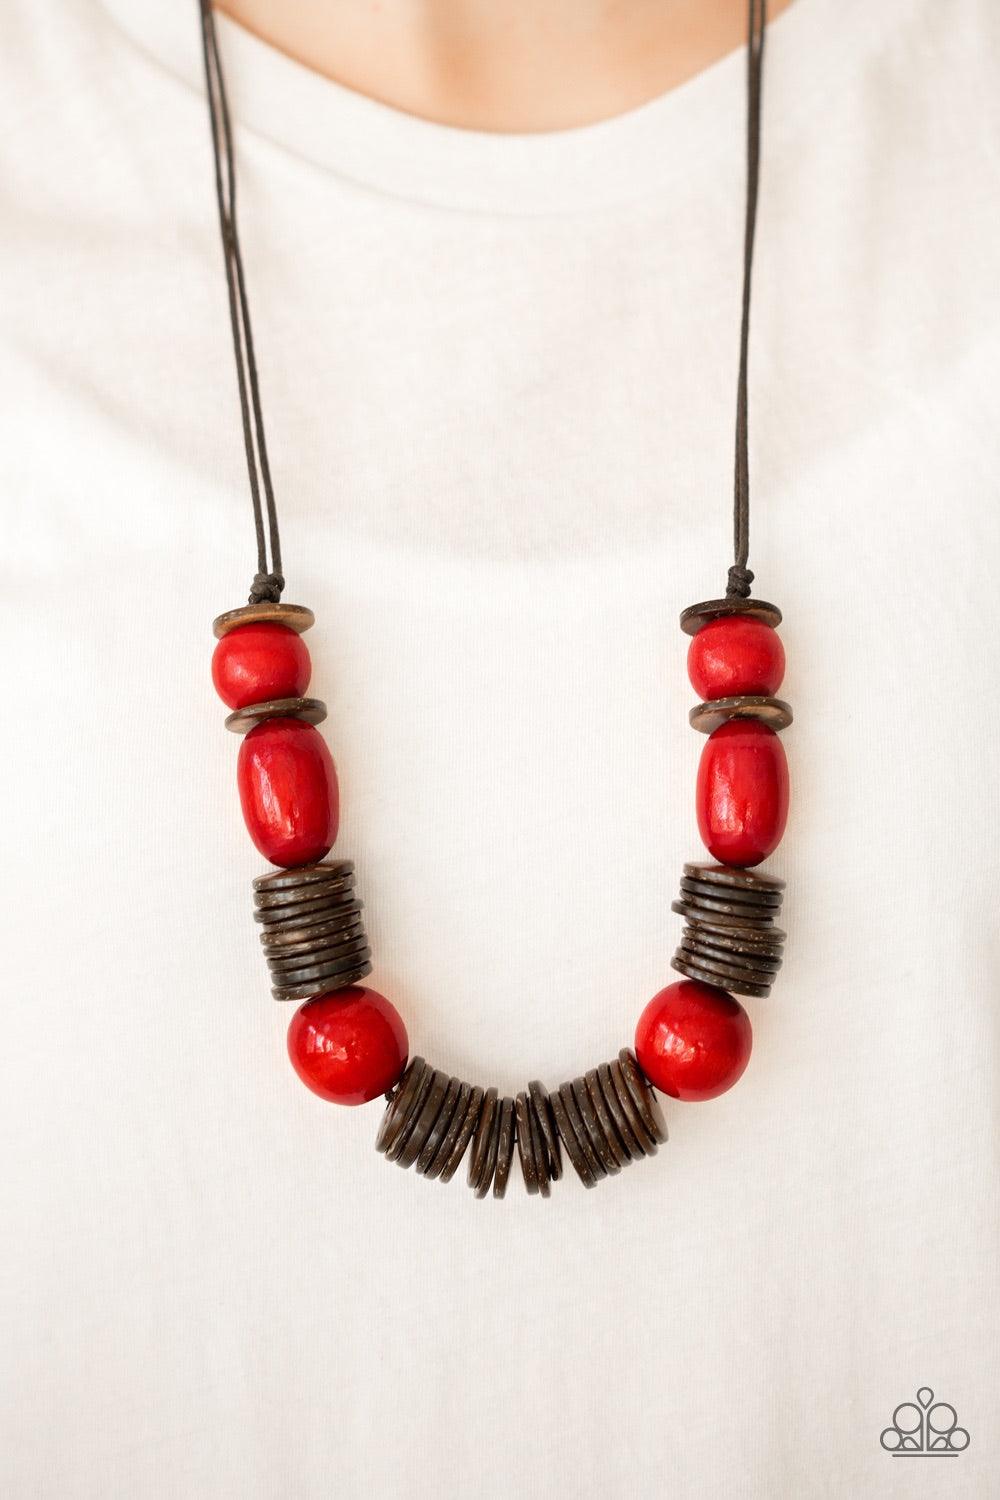 Paparazzi Accessories You Better BELIZE It - Red Brushed in a vibrant finish, red wooden beads and brown wooden discs are threaded along shiny brown cording for a summery look. Features an adjustable sliding knot closure. Jewelry